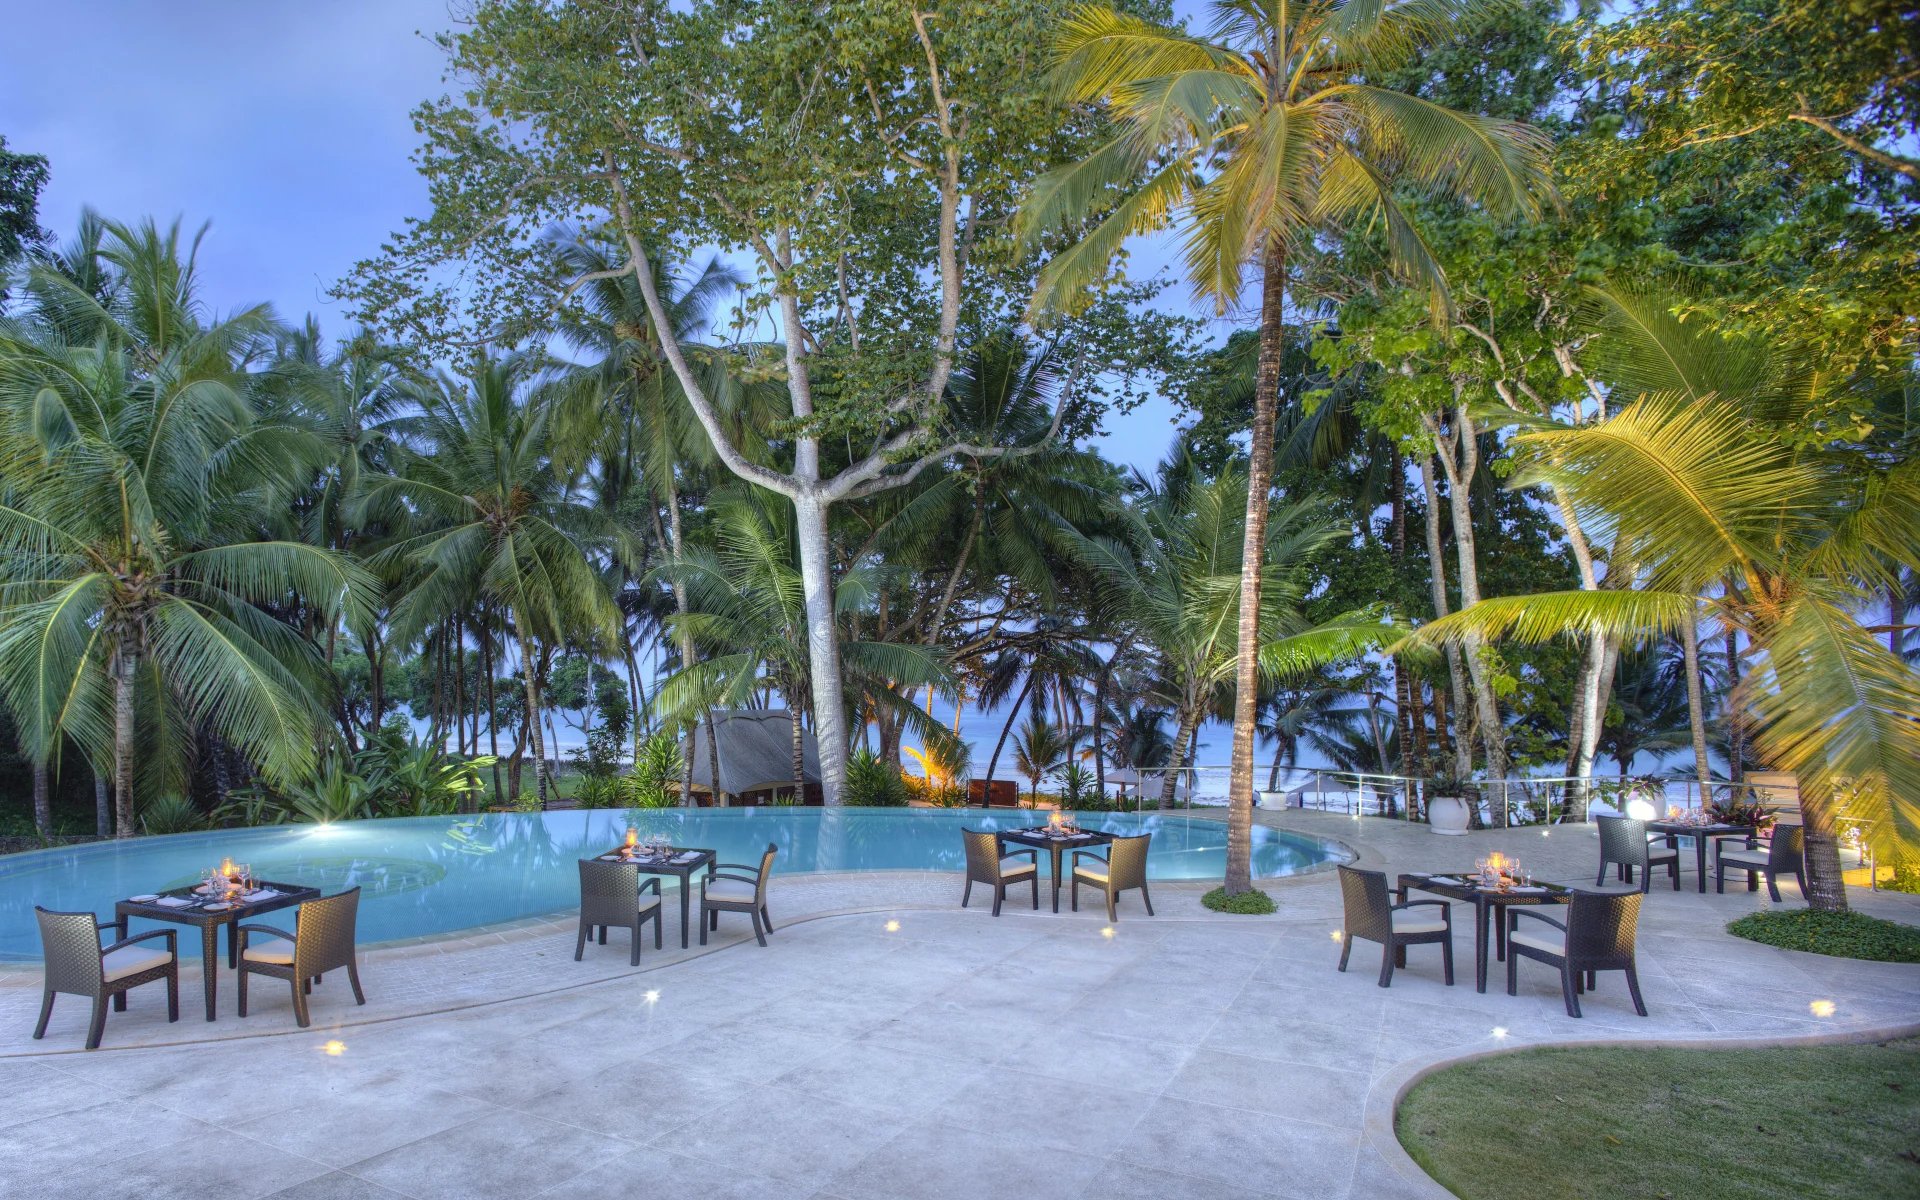 Chairs and tables are dotted around the Almanara's outdoor pool, encased by tall, tropical trees and plants.